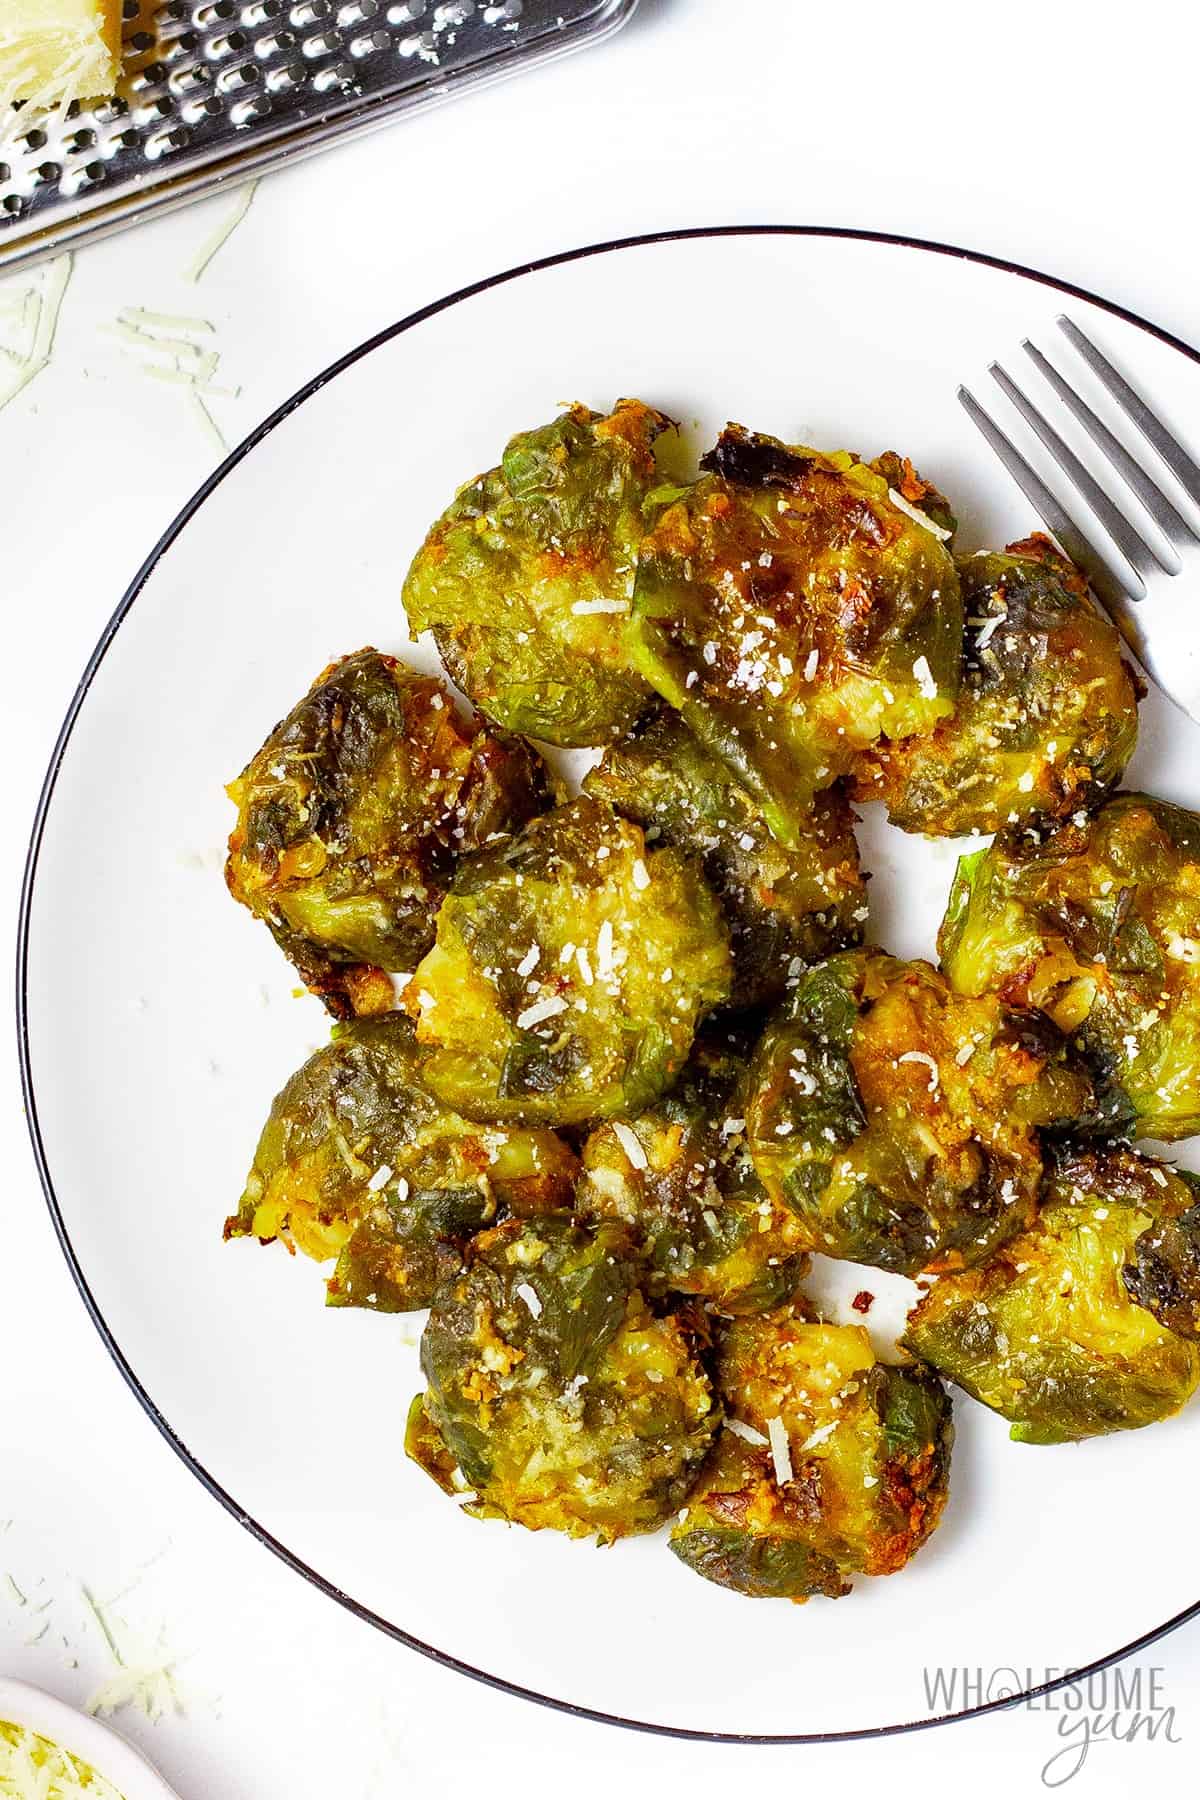 Crispy brussels sprouts with parmesan on a plate